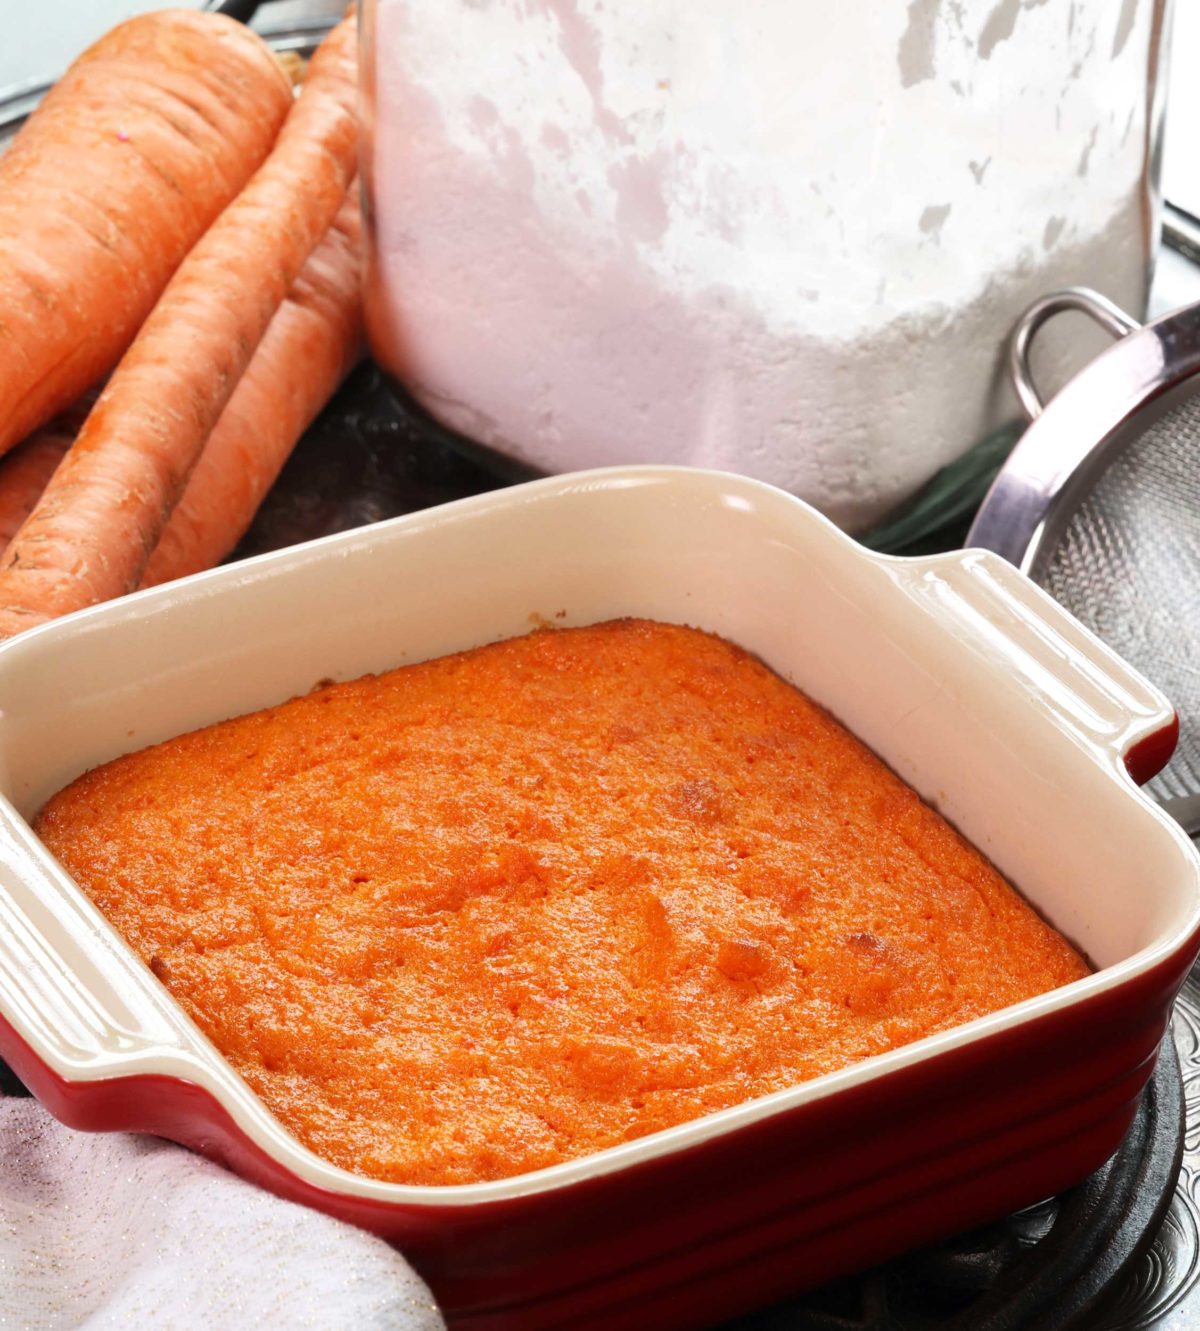 a small baked carrot souffle in a square red baking dish next to a container of powdered sugar and raw carrots.